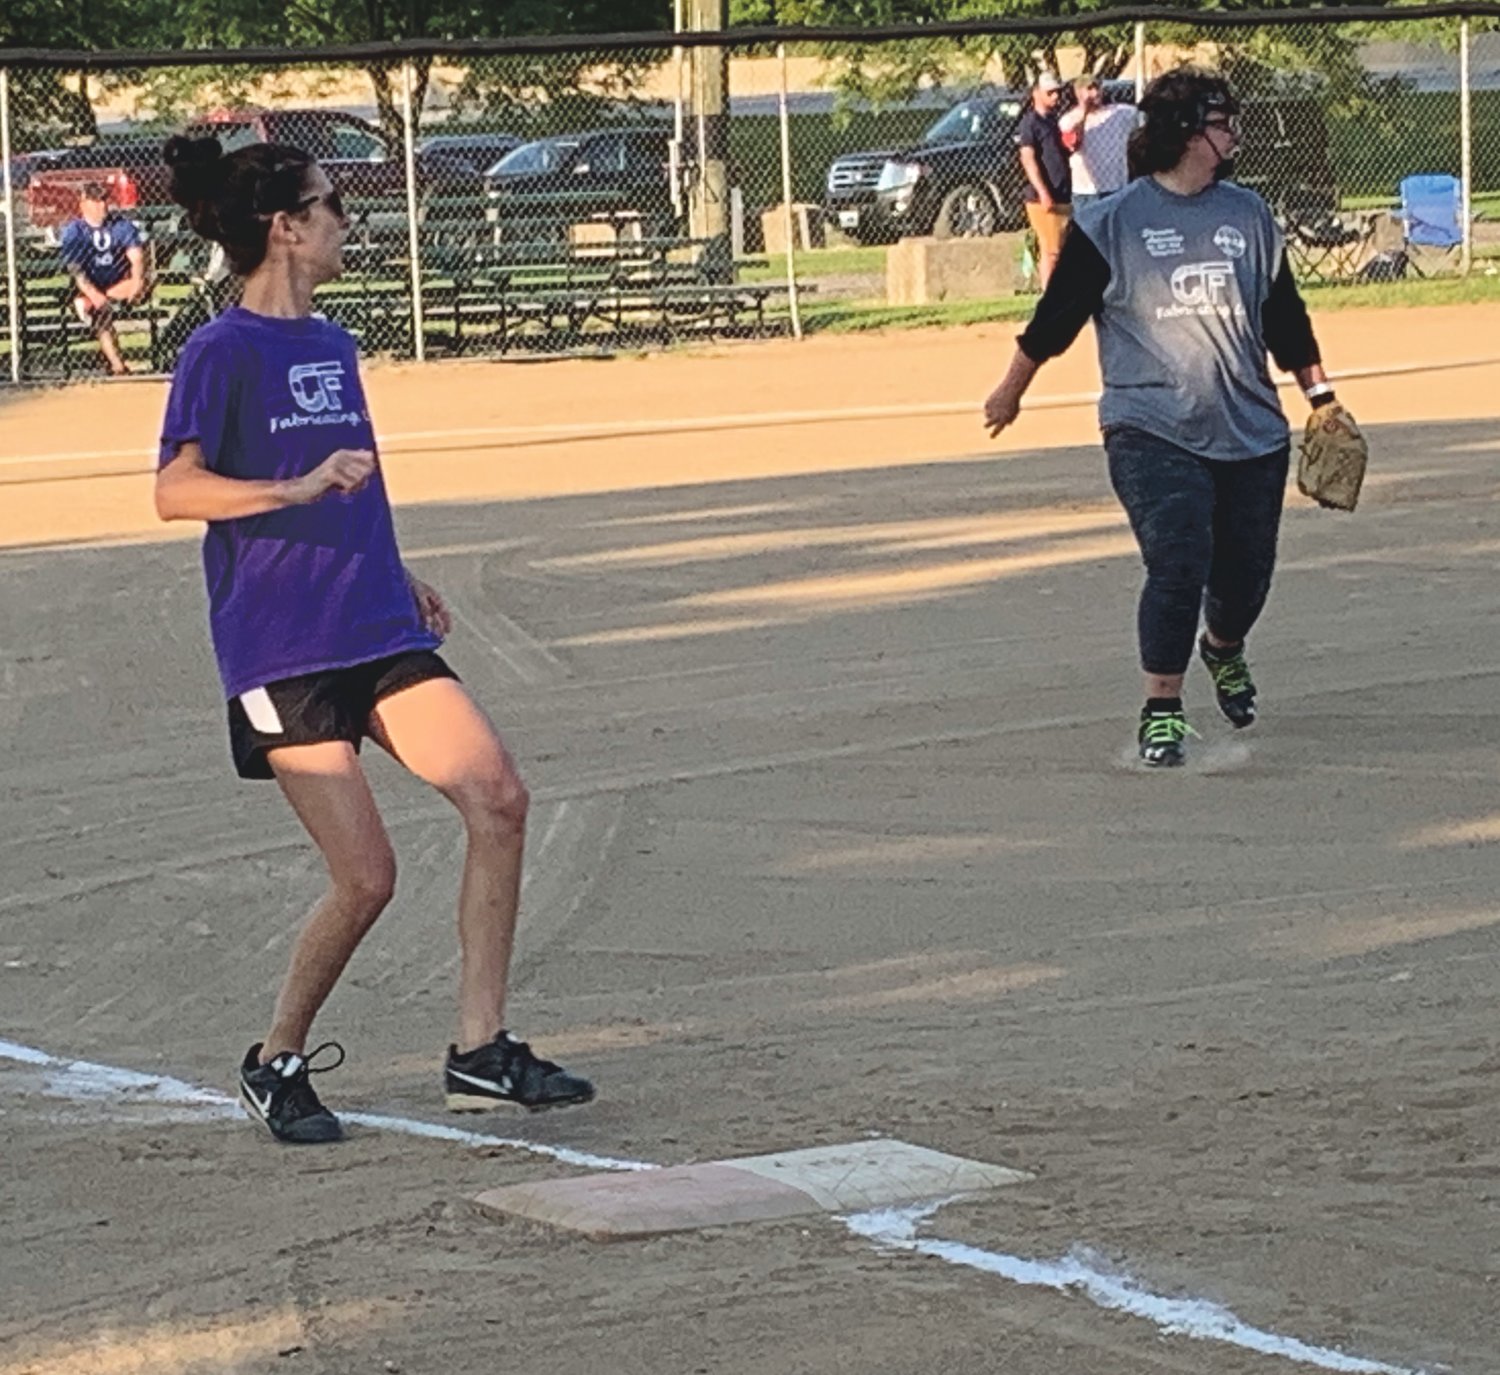 Jessica Dowell rounds first base after a hit early in C&F Fabricating's championship game win on Tuesday. Waiting for a throw back into the infield is Gould/Stephenson/C&F pitcher Shawna Simmons.